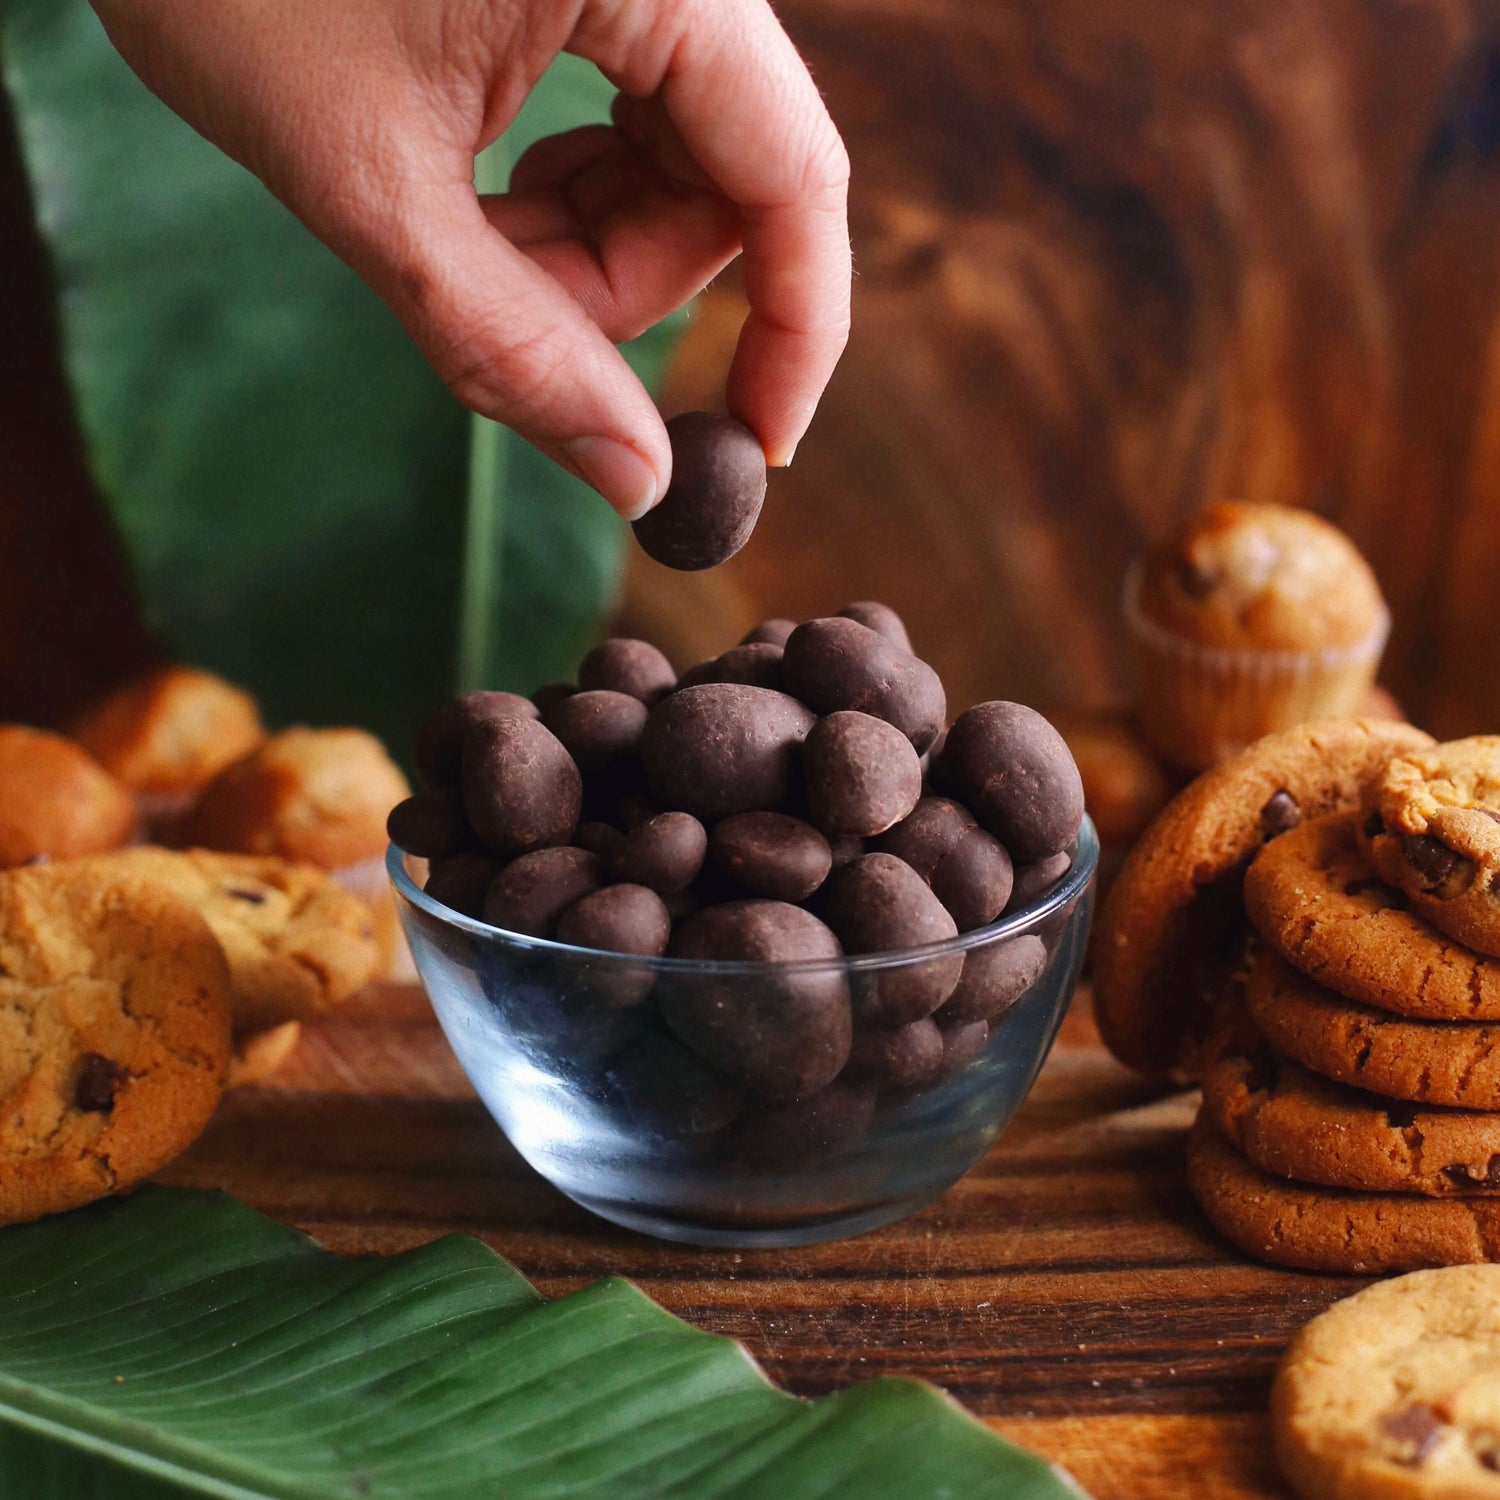 Image of a person picking up a dark chocolate macadamia from a bowl